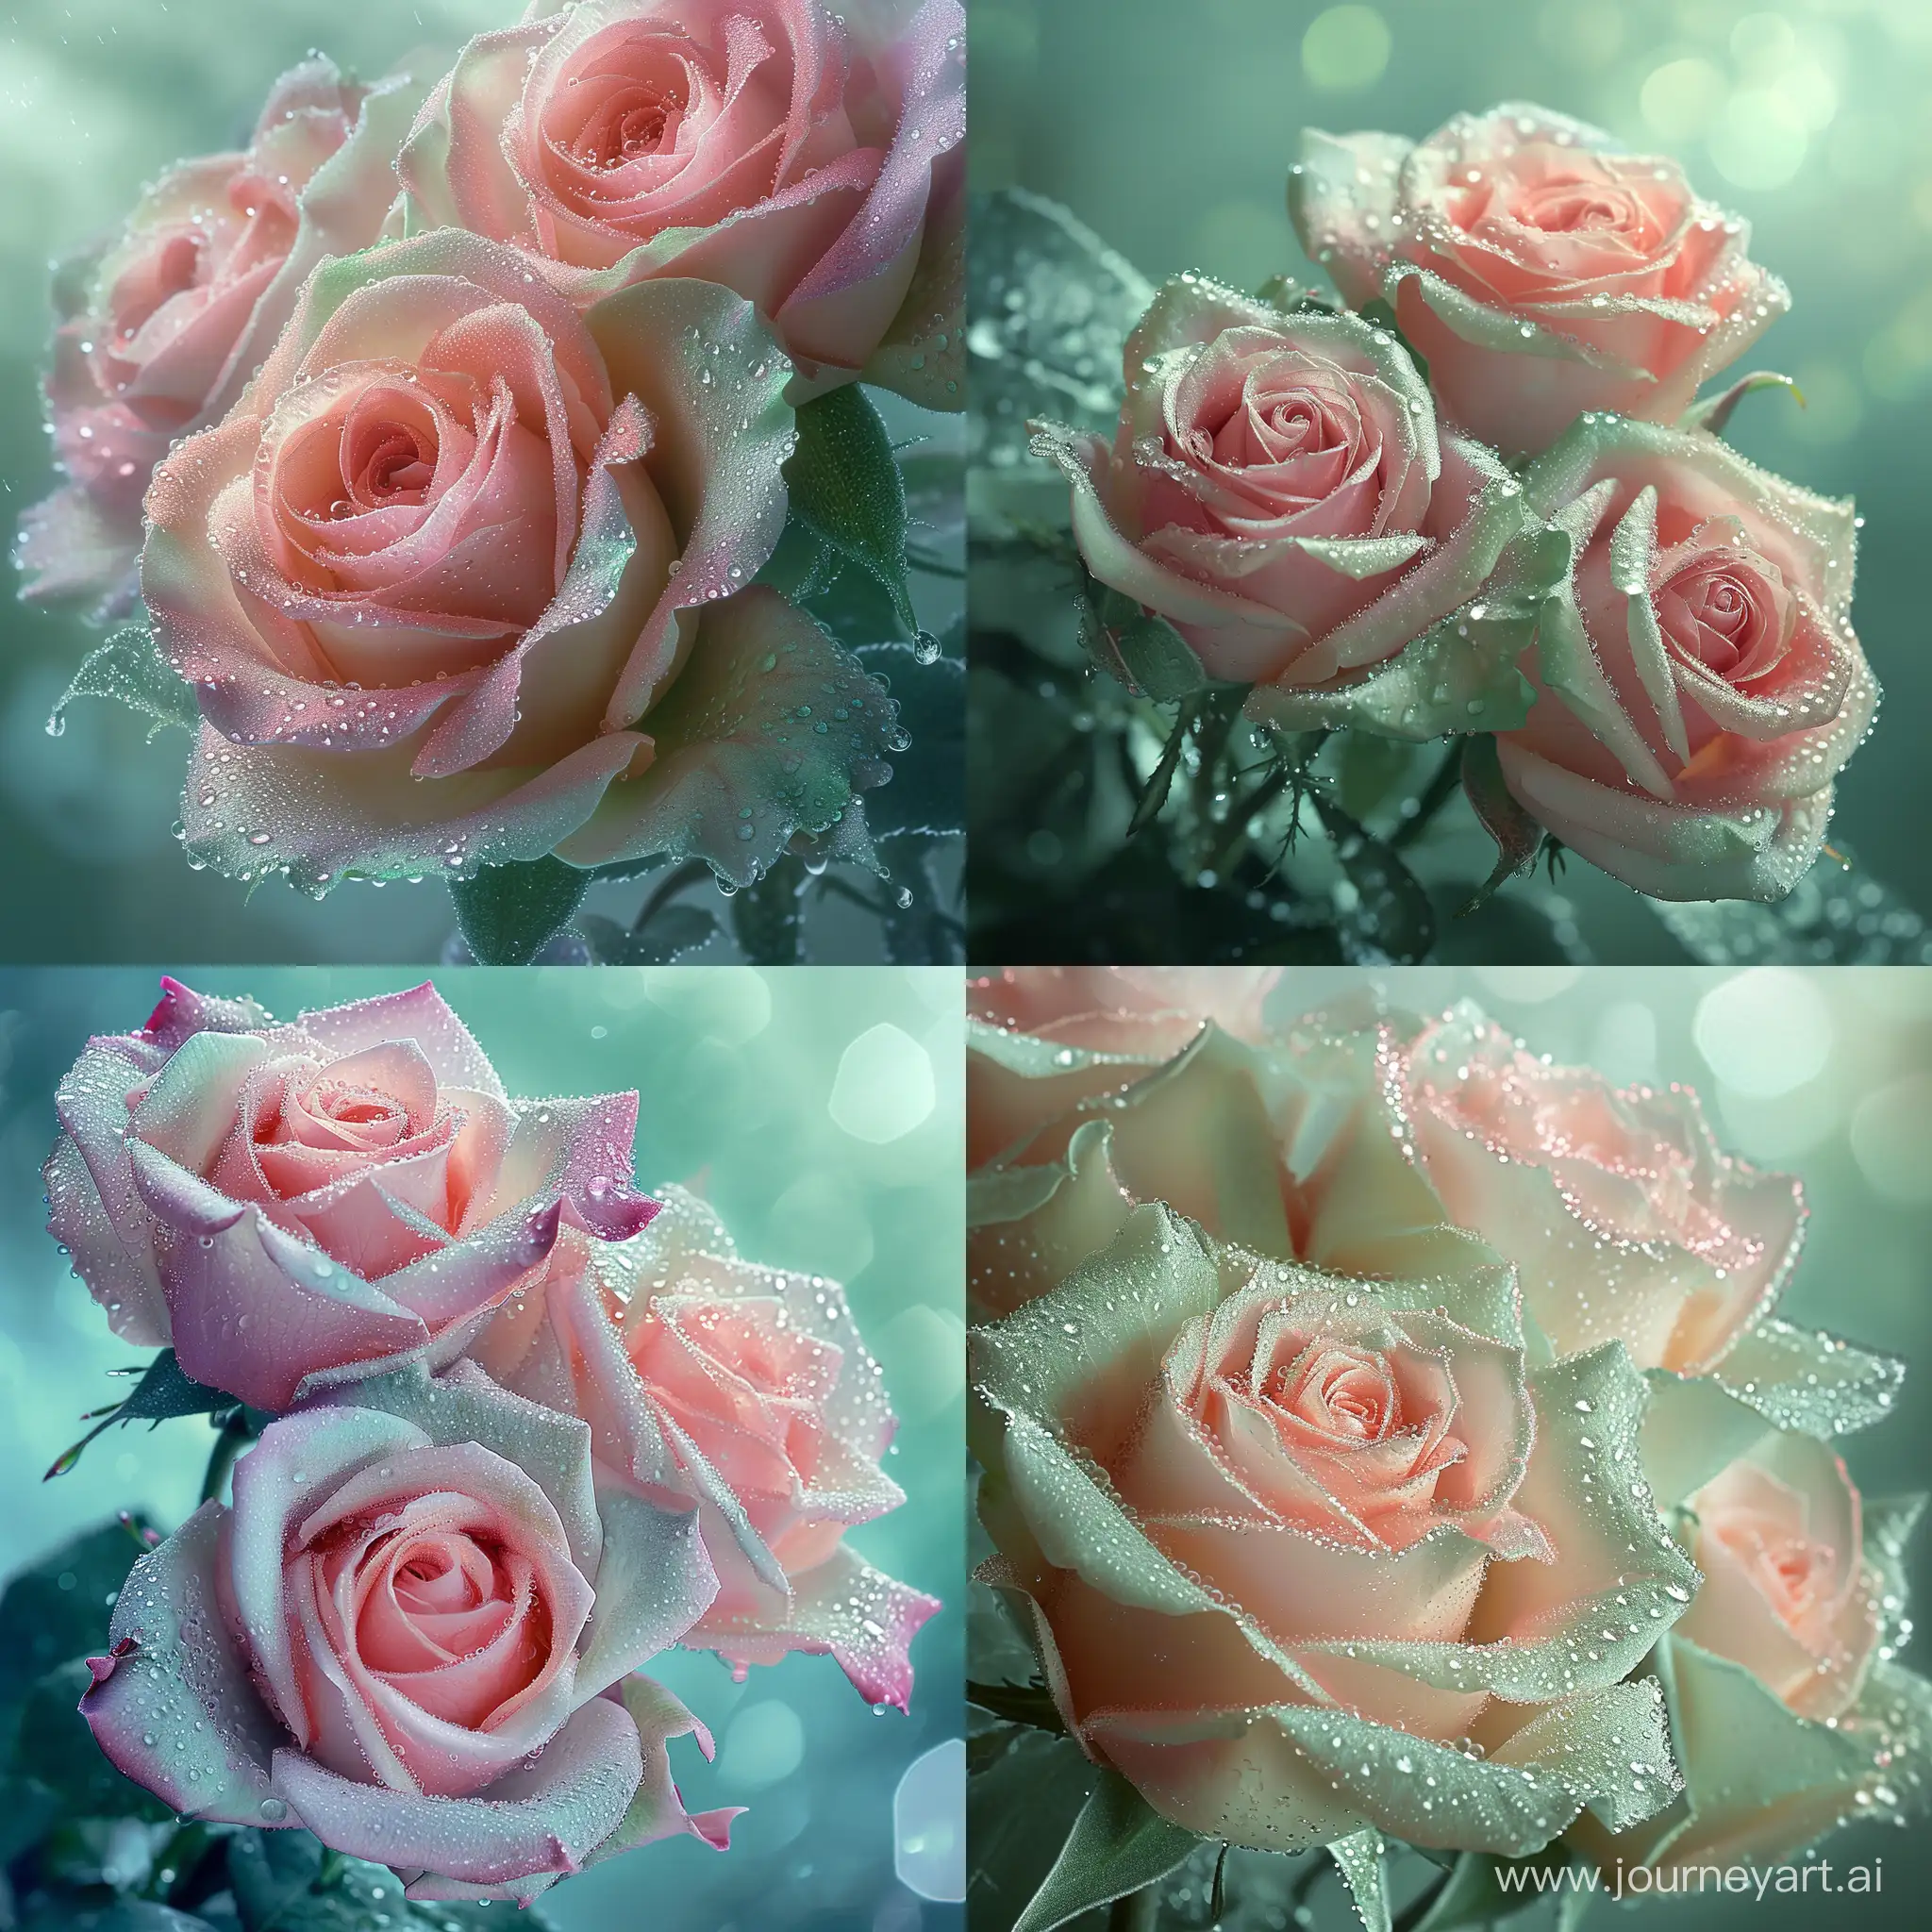 Enchanting-Minty-Rose-Bouquet-with-Sparkling-Dewdrops-at-Dawn